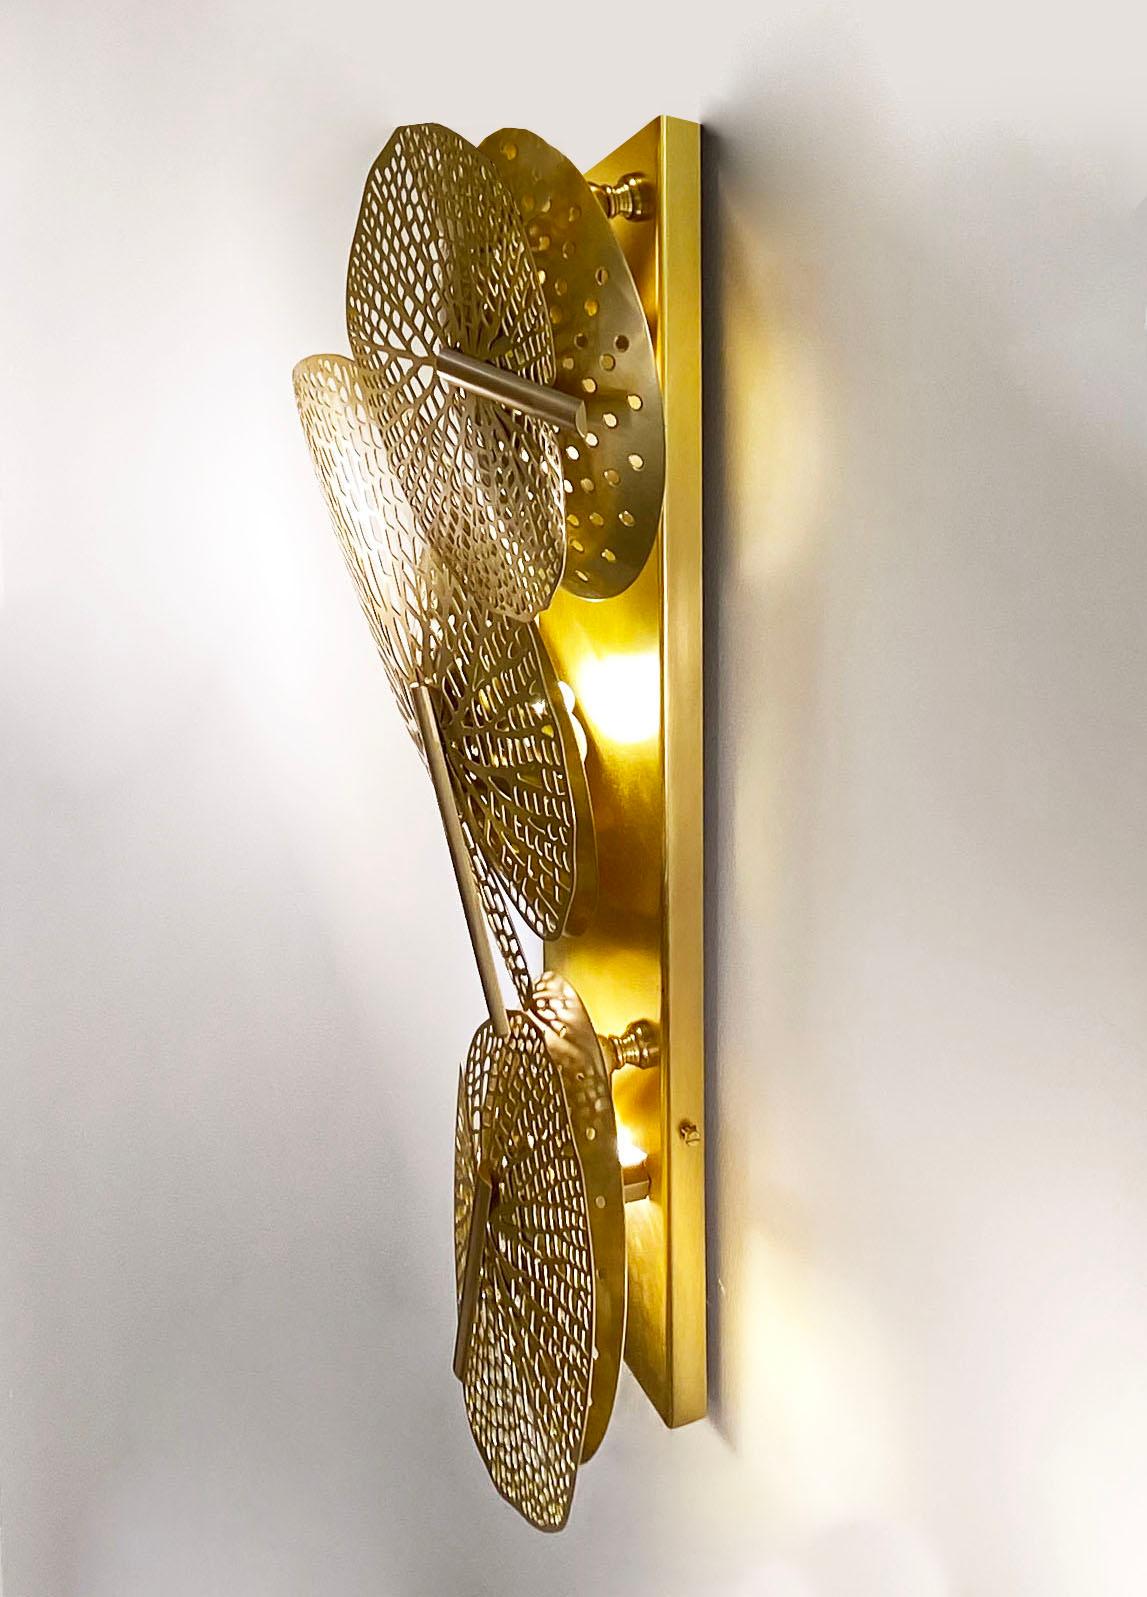 The brass leaves of different sizes on this Art Deco Design sculpture sconce introduce nature into your interior and this is in itself a unique Work of Art, entirely handcrafted, engraved, and laser-cut. Concealing pierced concave discs hide a brass